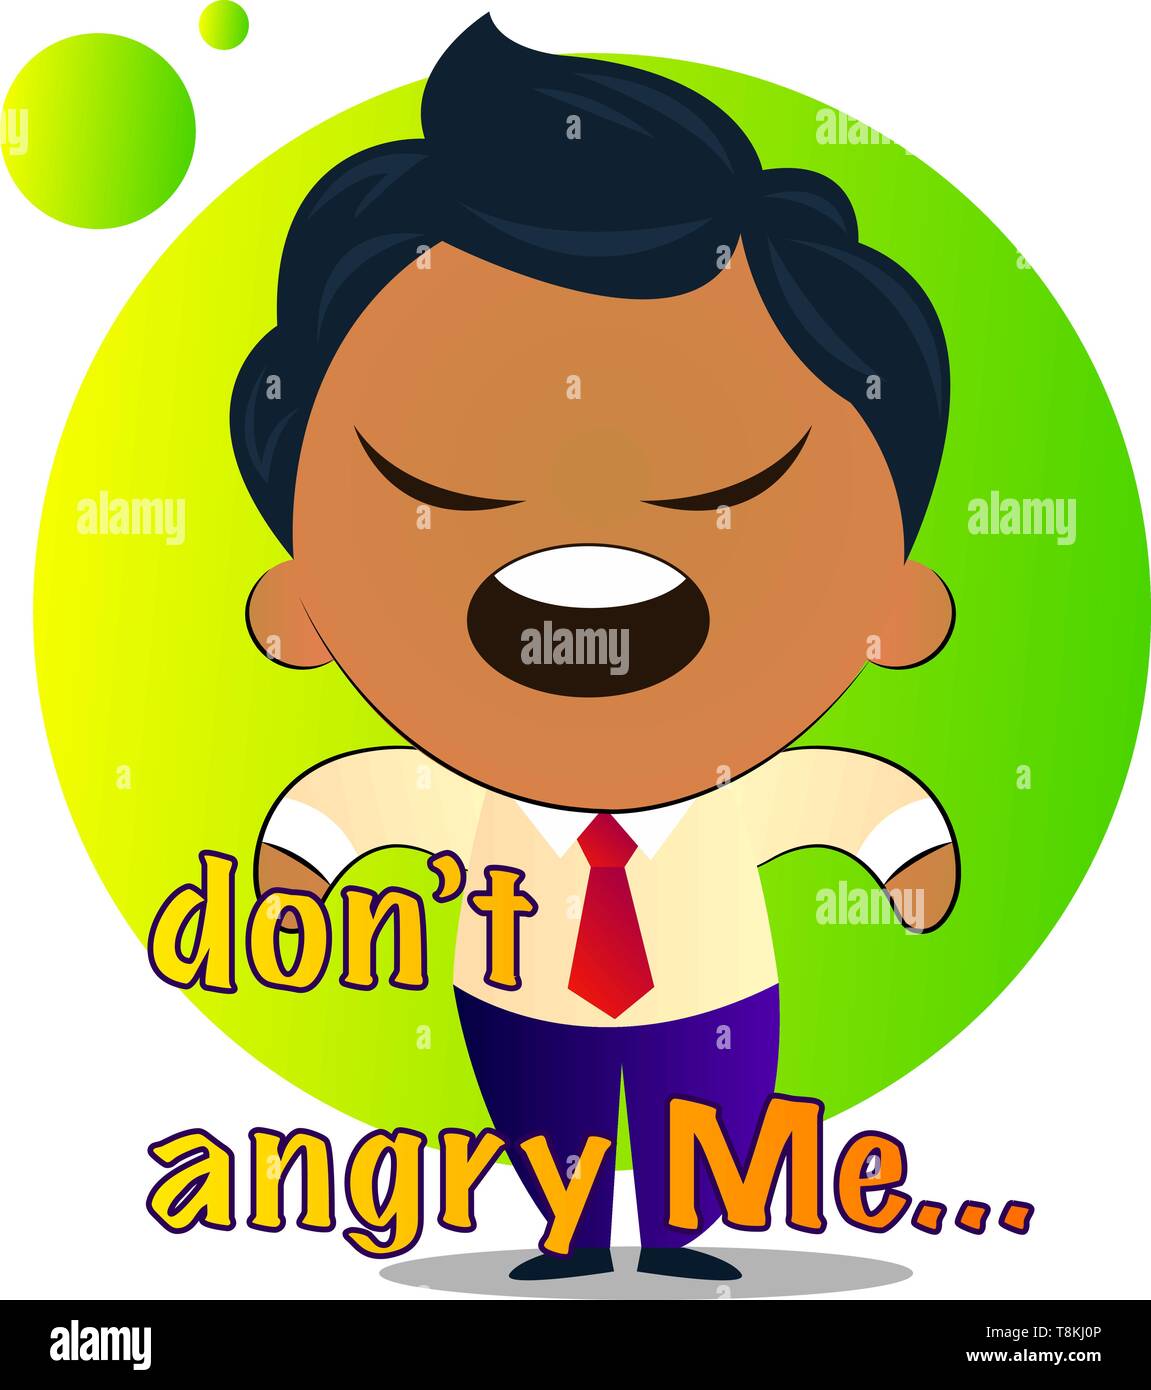 Boy in a suit with curly hair says don't angry me, illustration, vector on white background. Stock Vector